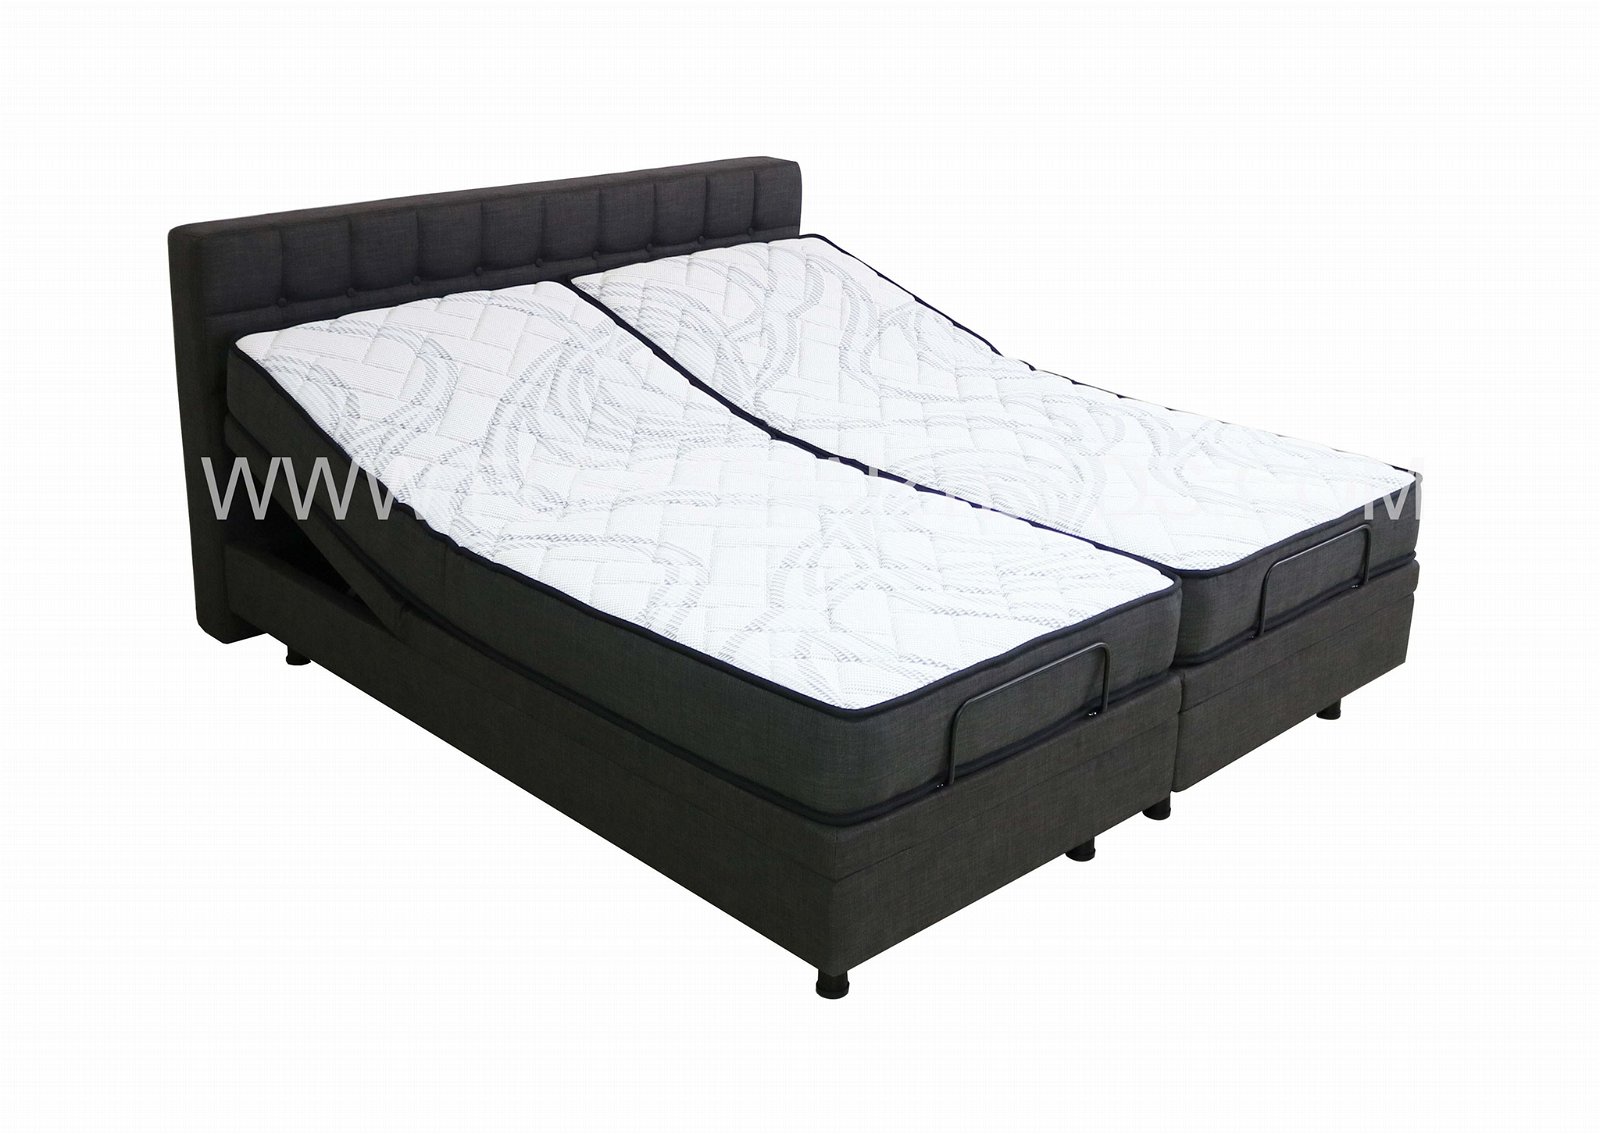 Adjustable Beds for Home Use 4